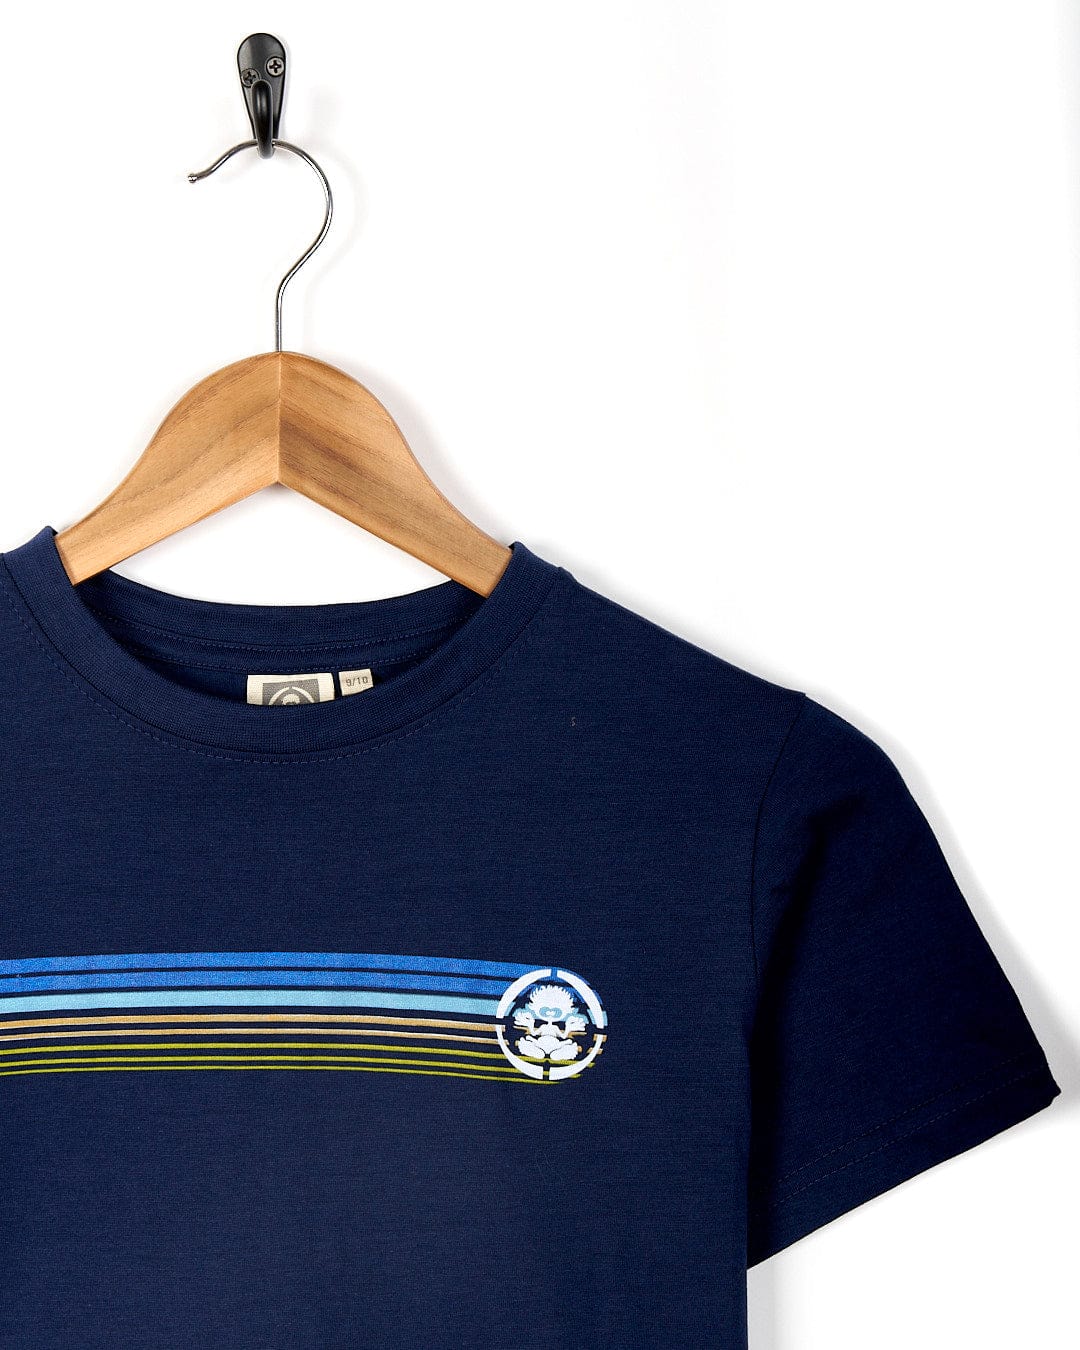 A navy Saltrock Tok Stripe - Kids Short Sleeve Tee - Dark Blue with retro stripes in blue, green, and yellow.